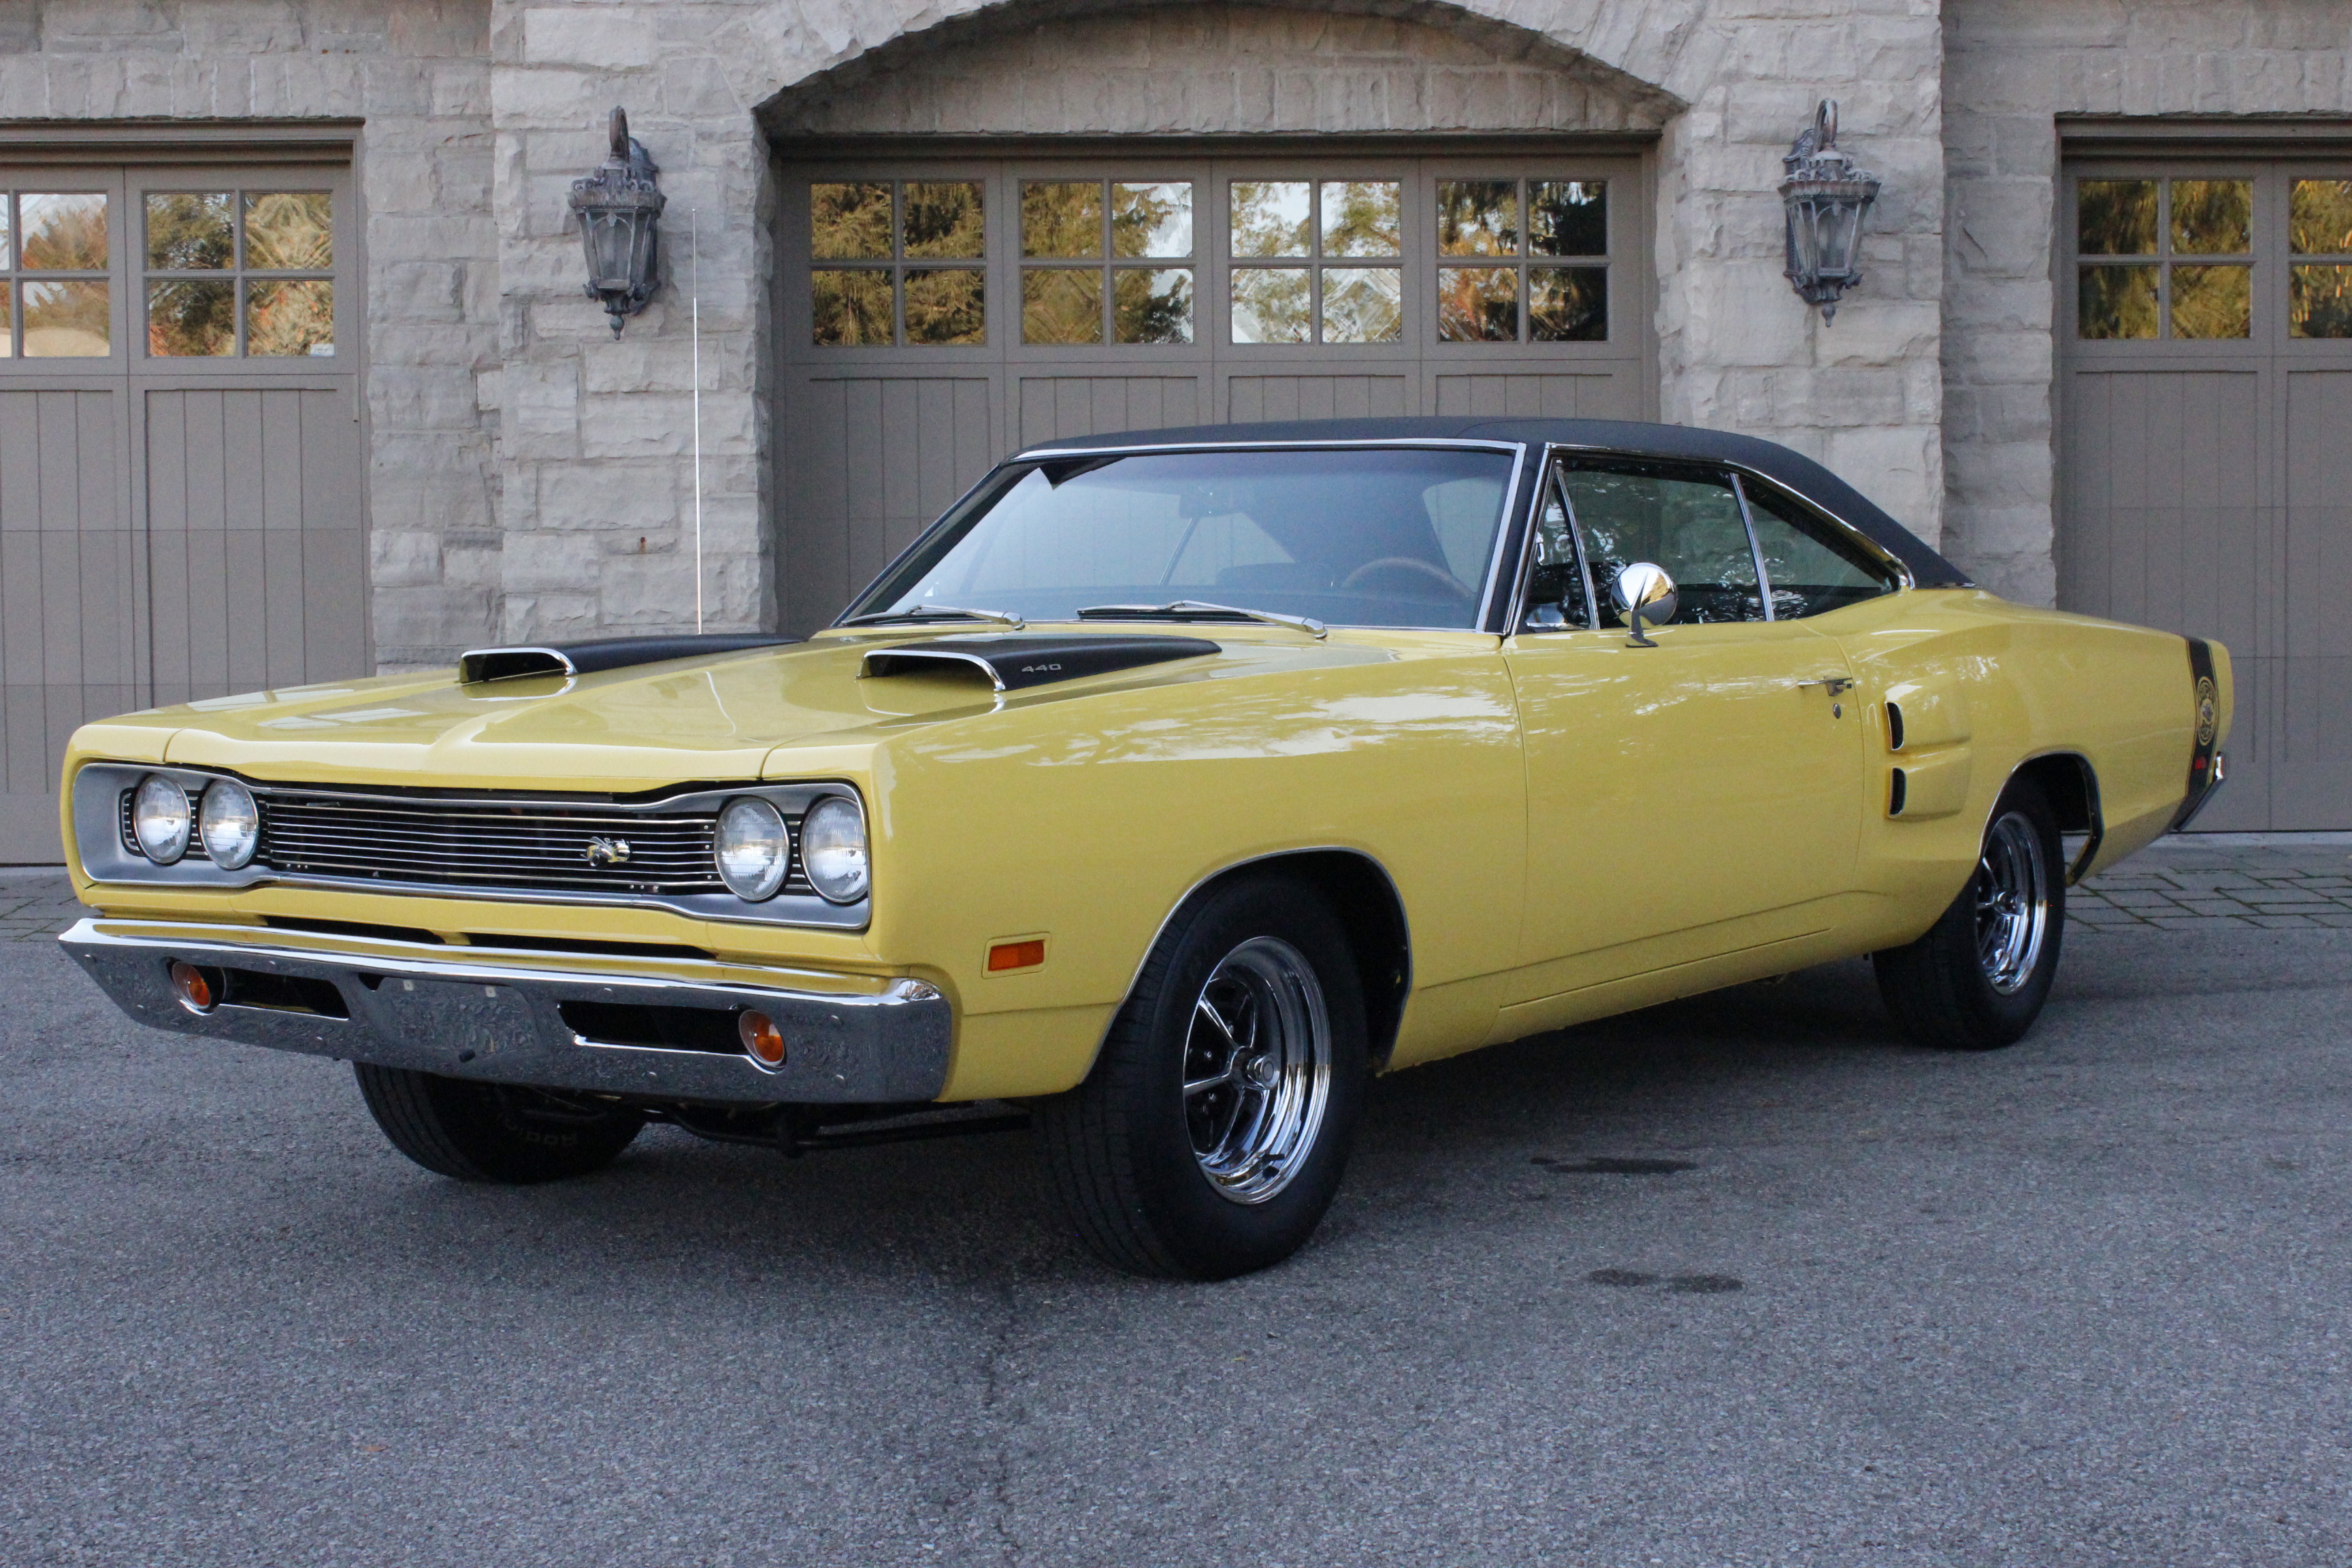 A yellow Super Bee